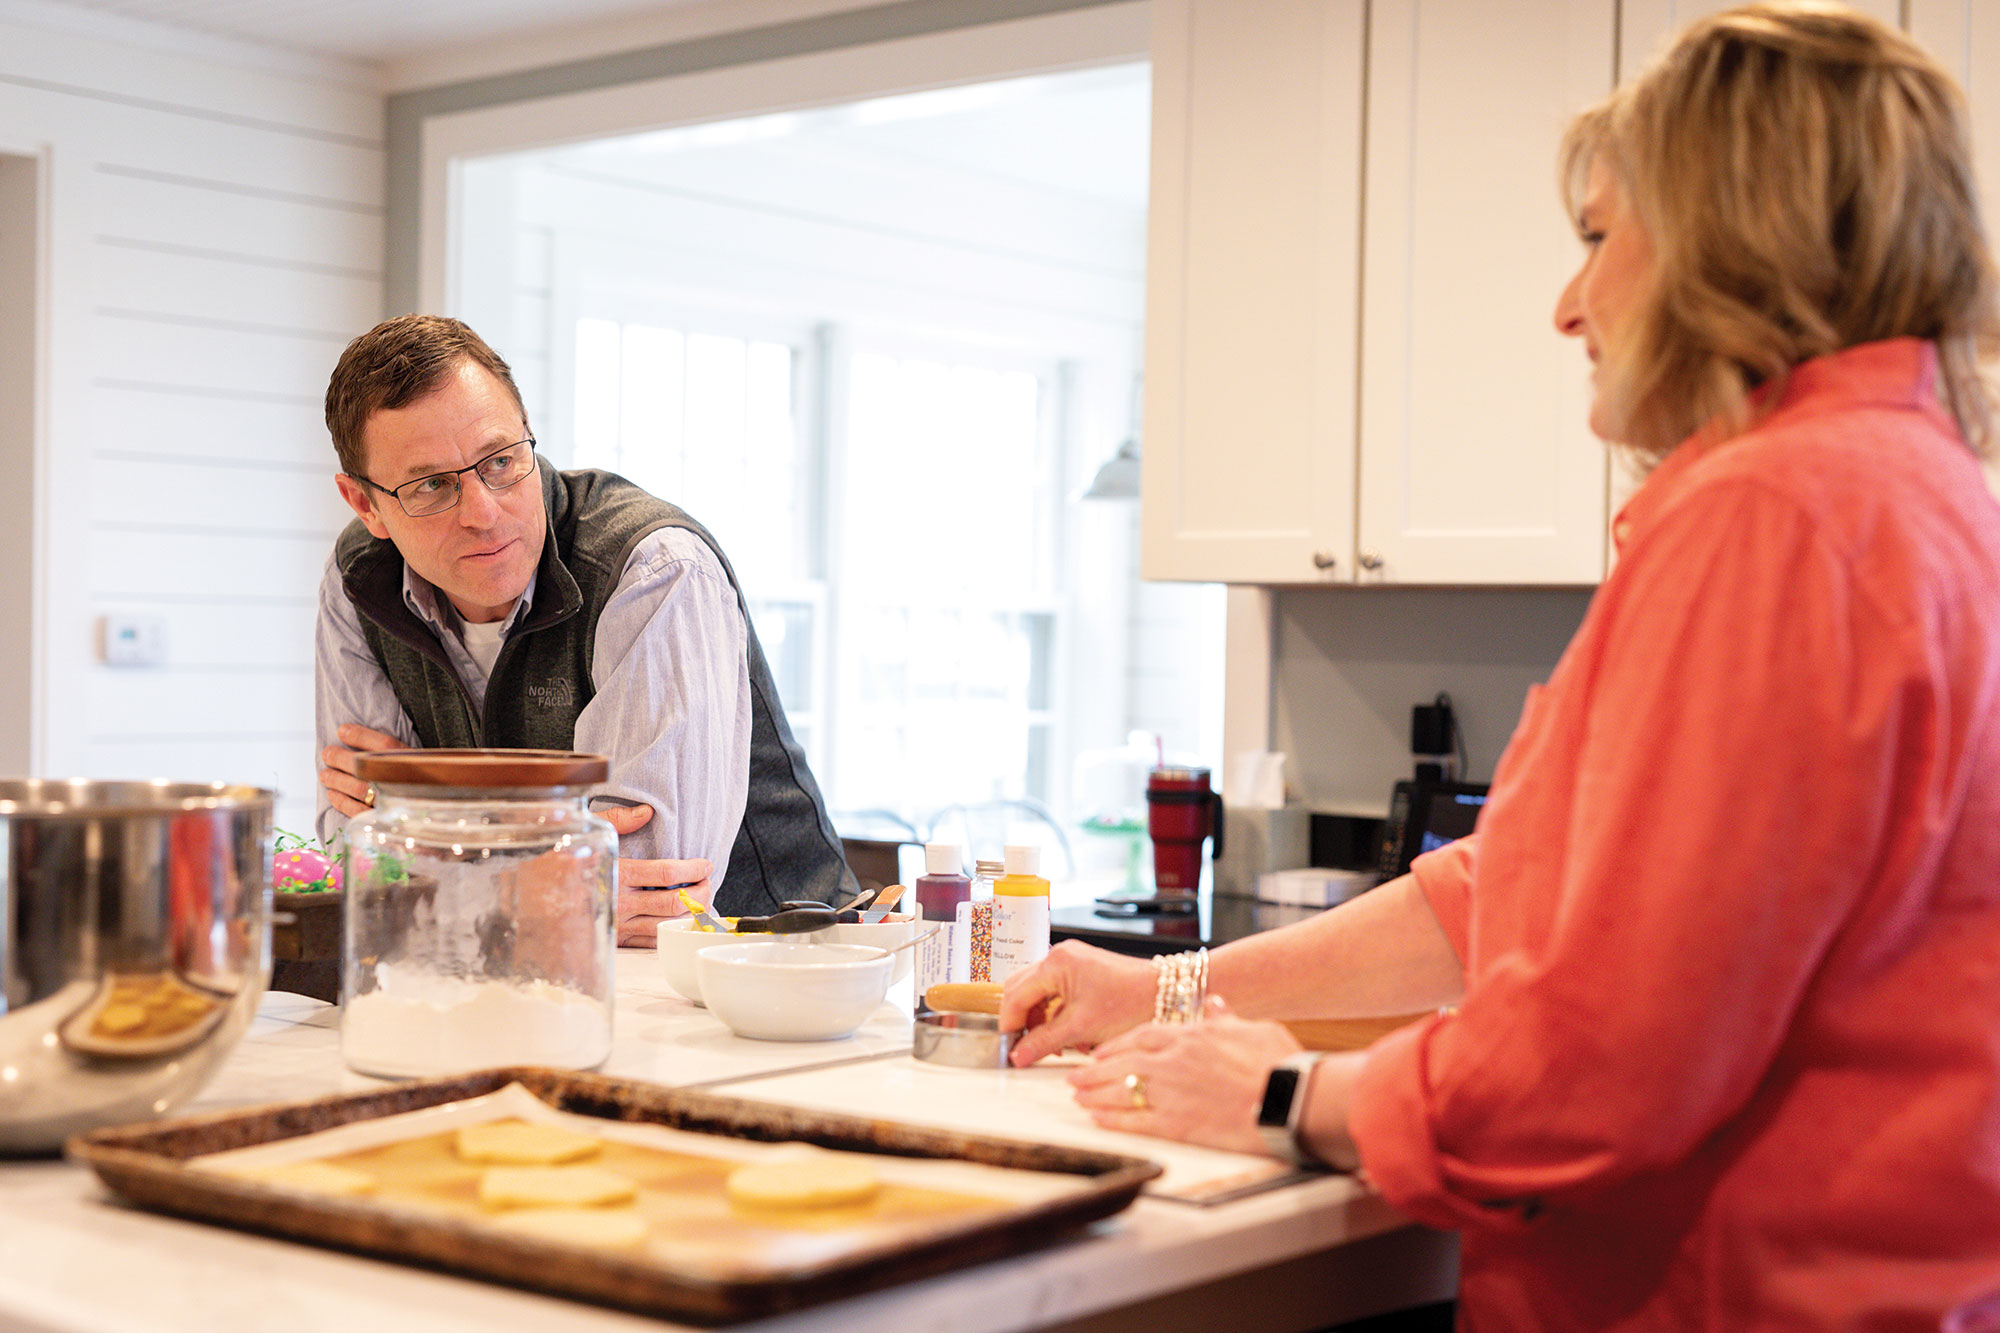 Steve and Debbie Rhines enjoy time together in their kitchen at home.